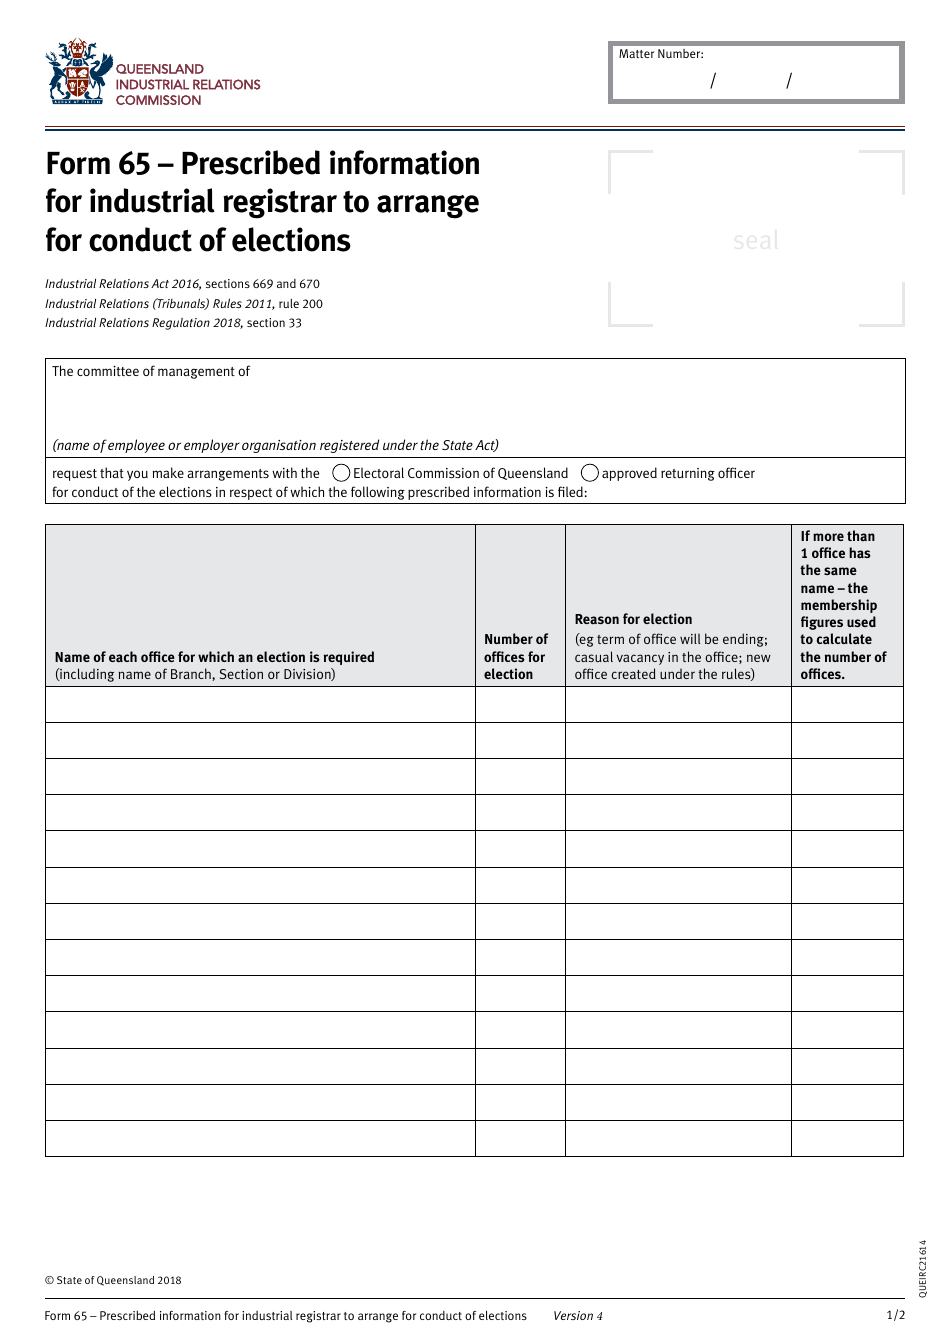 Form 65 Prescribed Information for Industrial Registrar to Arrange for Conduct of Elections - Queensland, Australia, Page 1